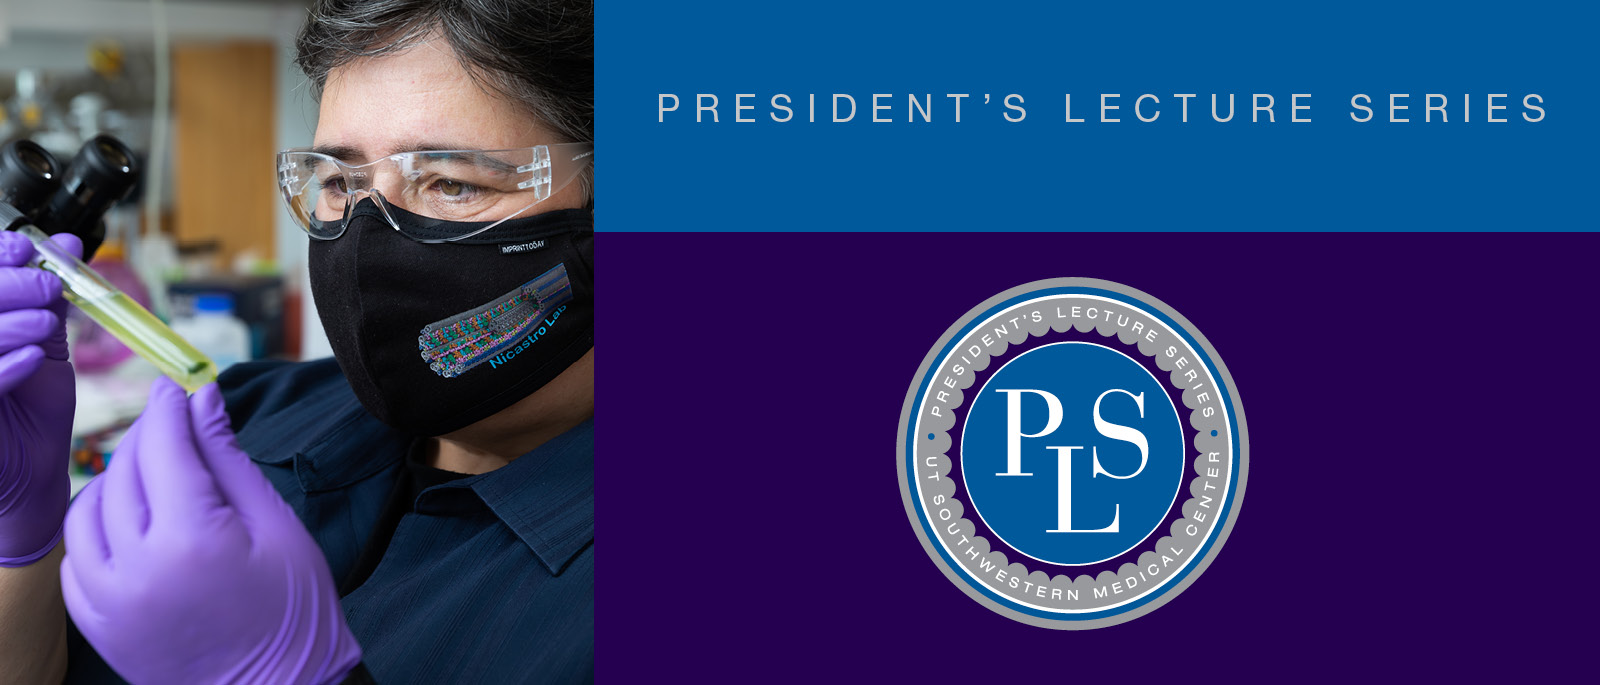 President's Lecture Series, PLS logo, and woman in mask with gloves, safety glasses, handling a test tube